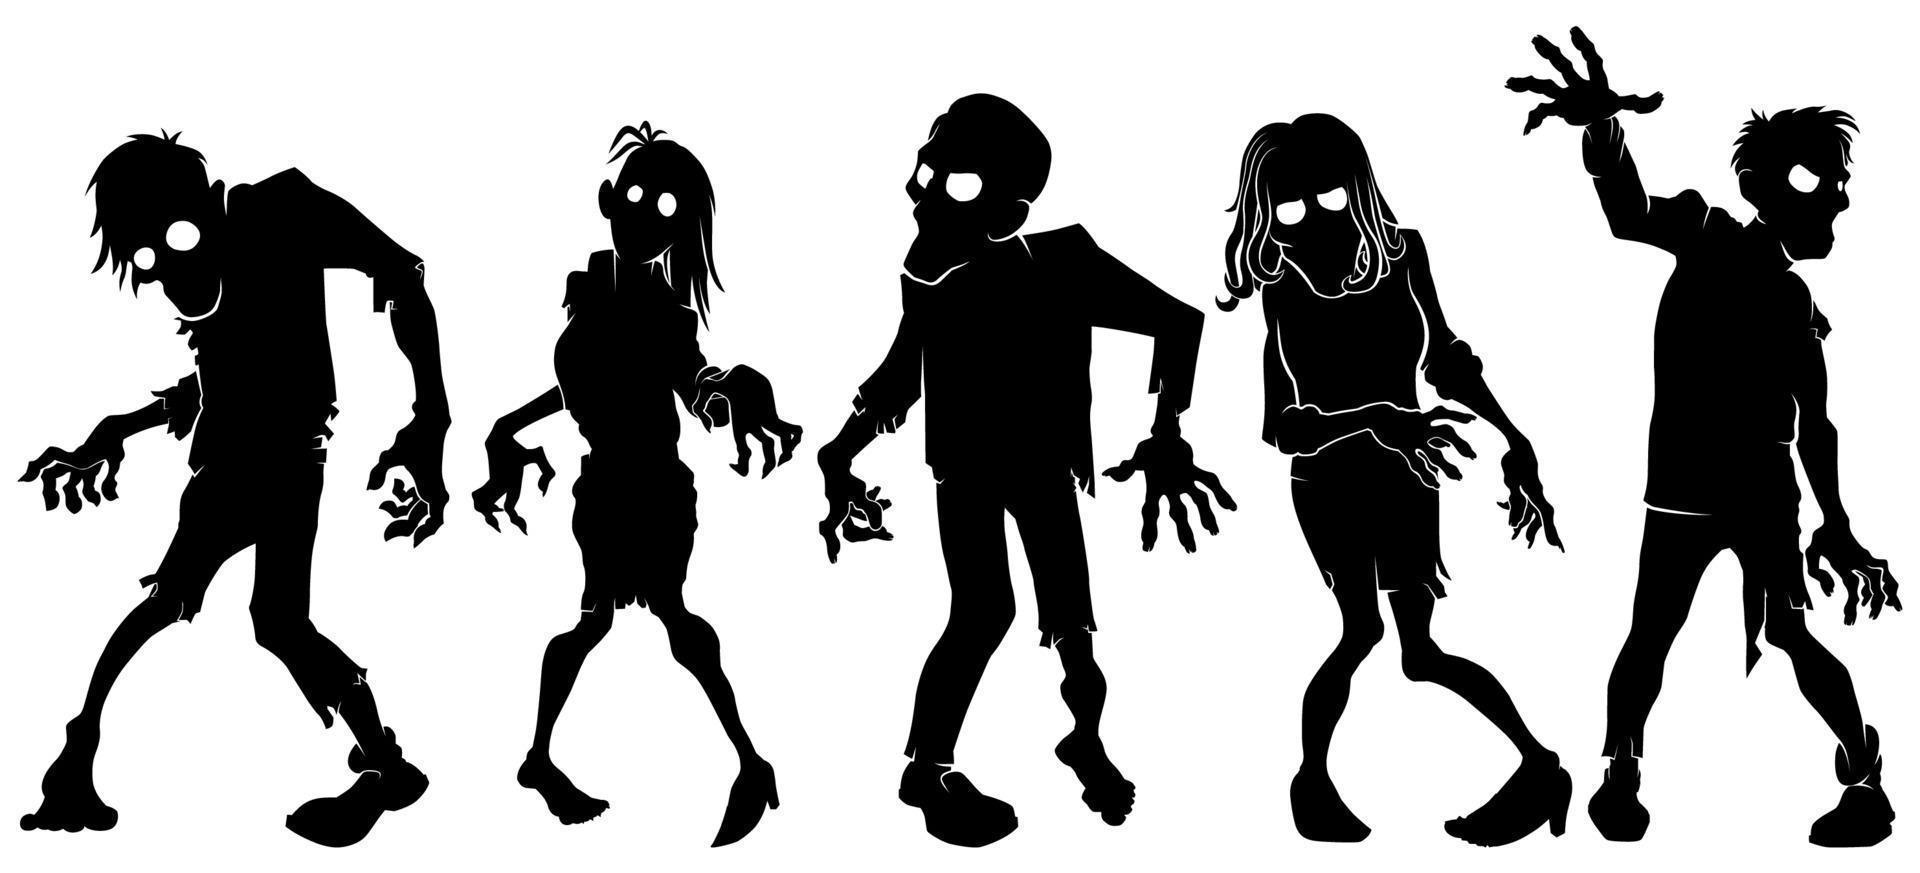 Zombie Silhouettes Set vector